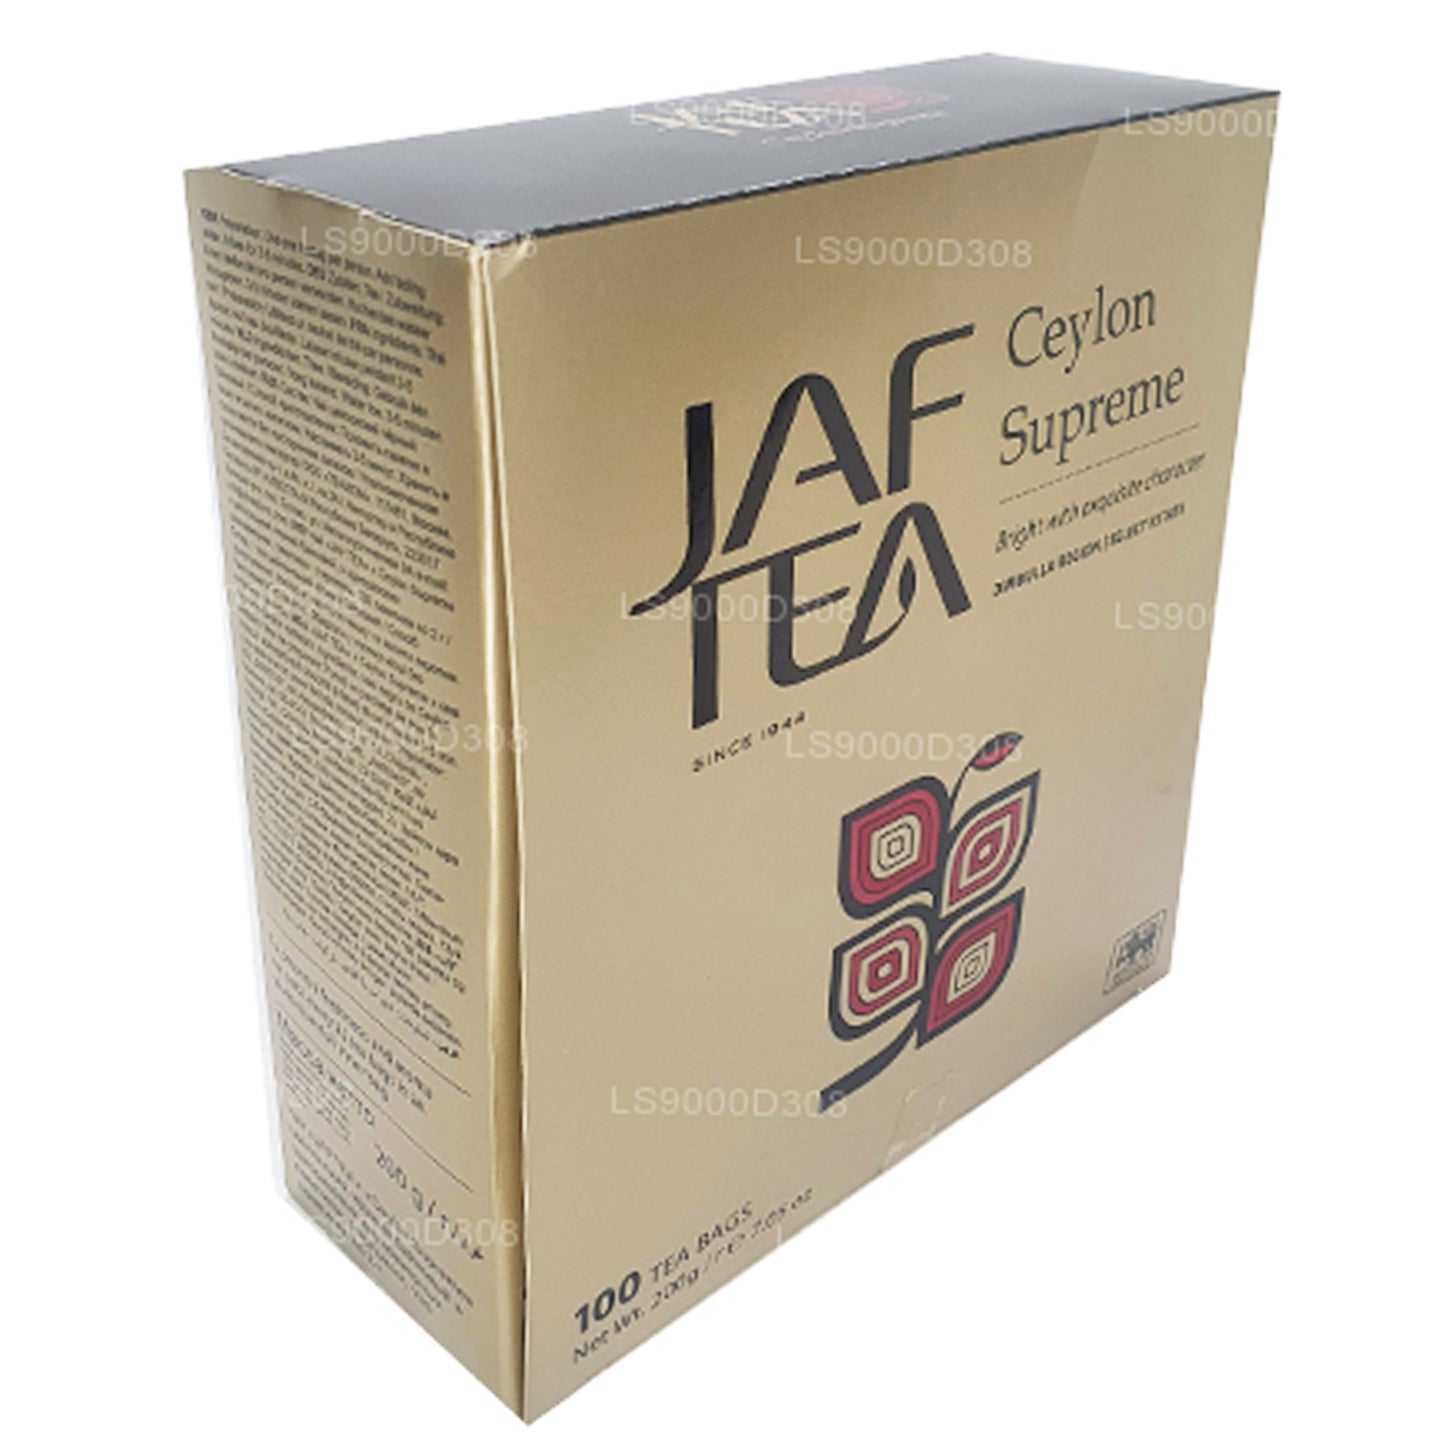 Jaf Tea Classic Gold Collection Ceylon Supreme 100 torebek herbaty String and Tag (200g)